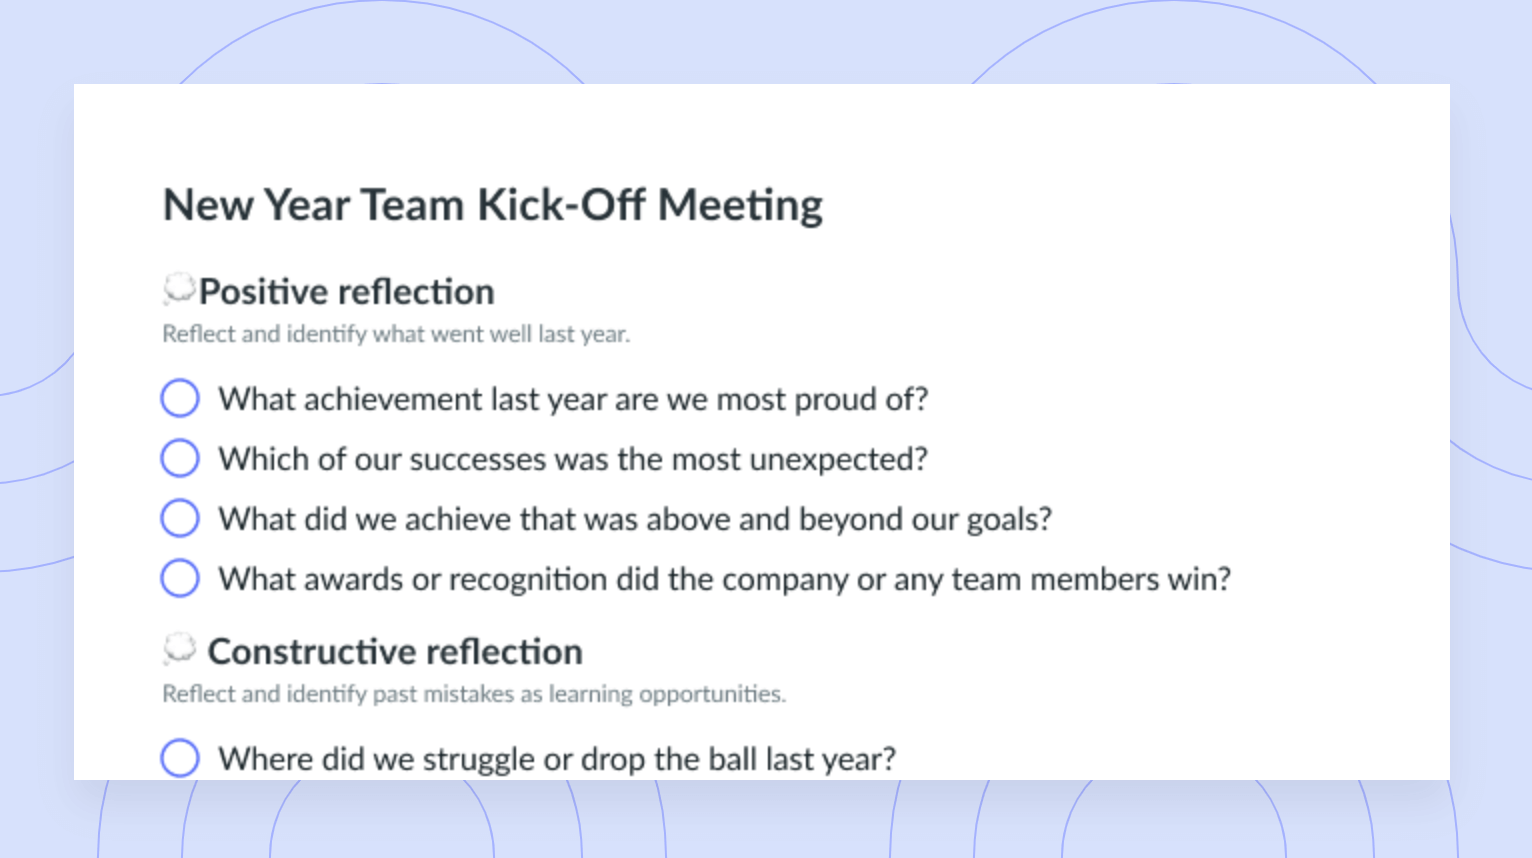 New Year Team Kick-Off Meeting Template